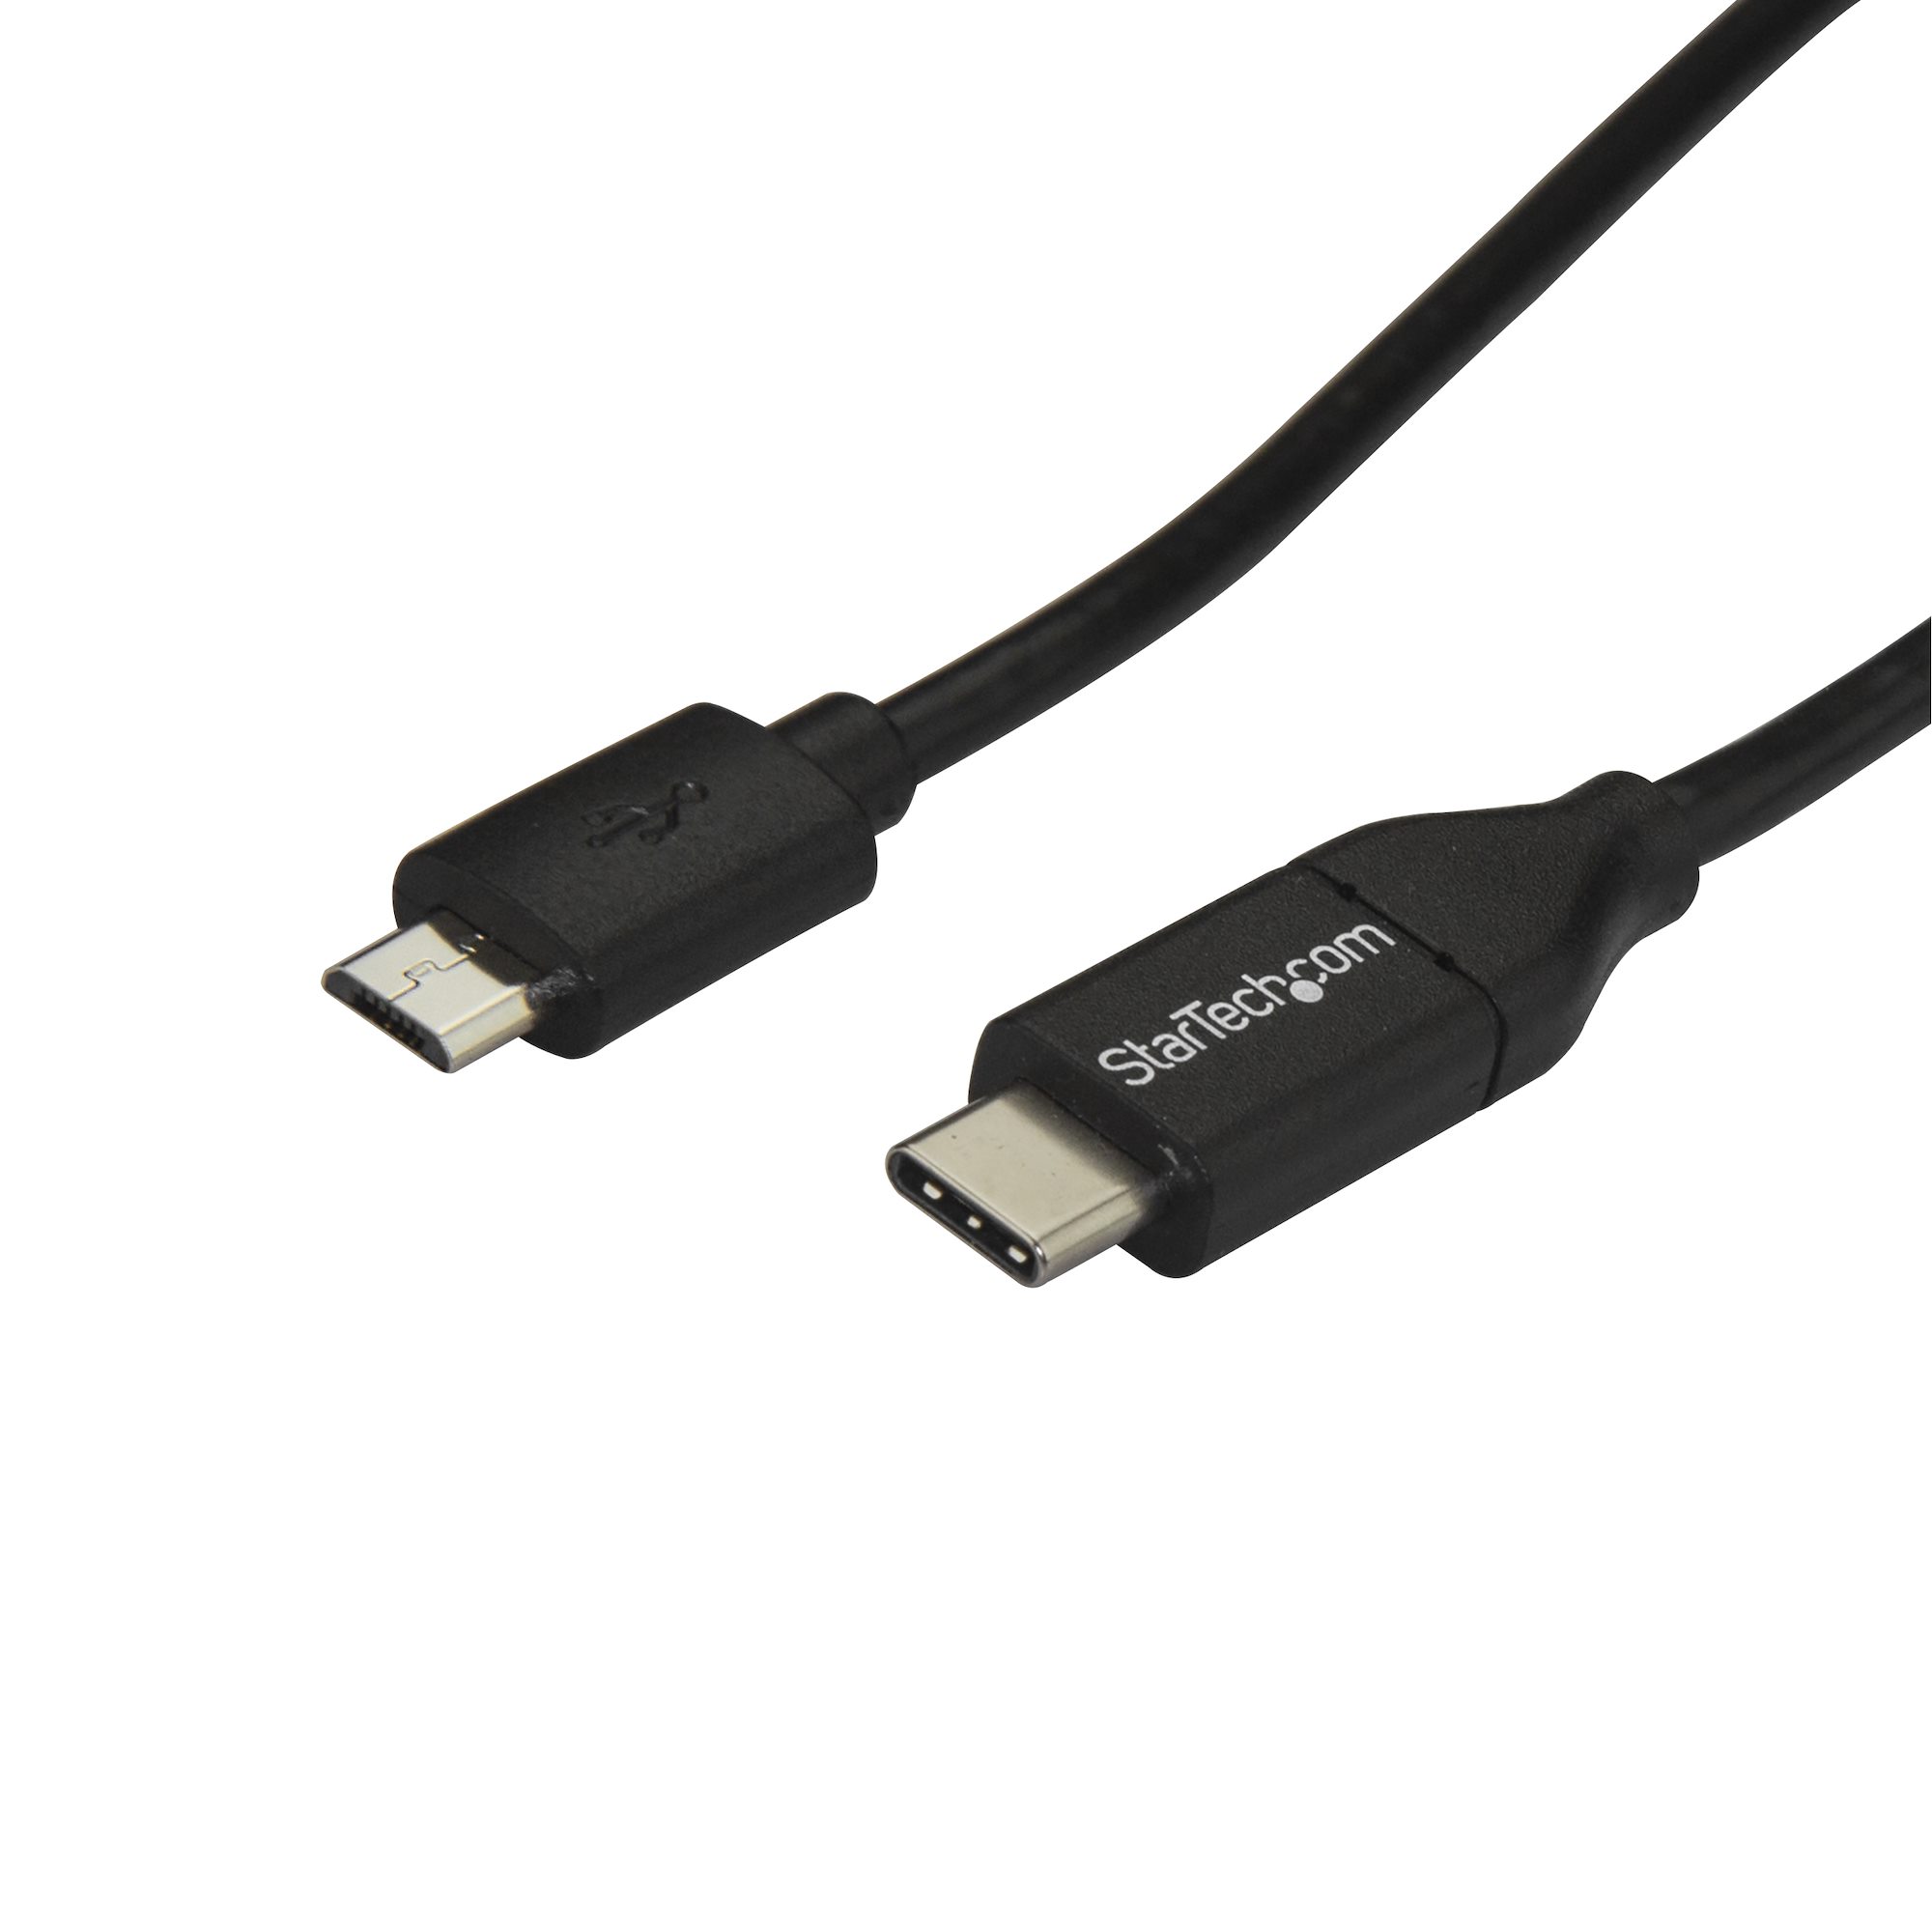 1m USB C to Micro Cable - USB 2.0 - USB-C Cables | StarTech.com